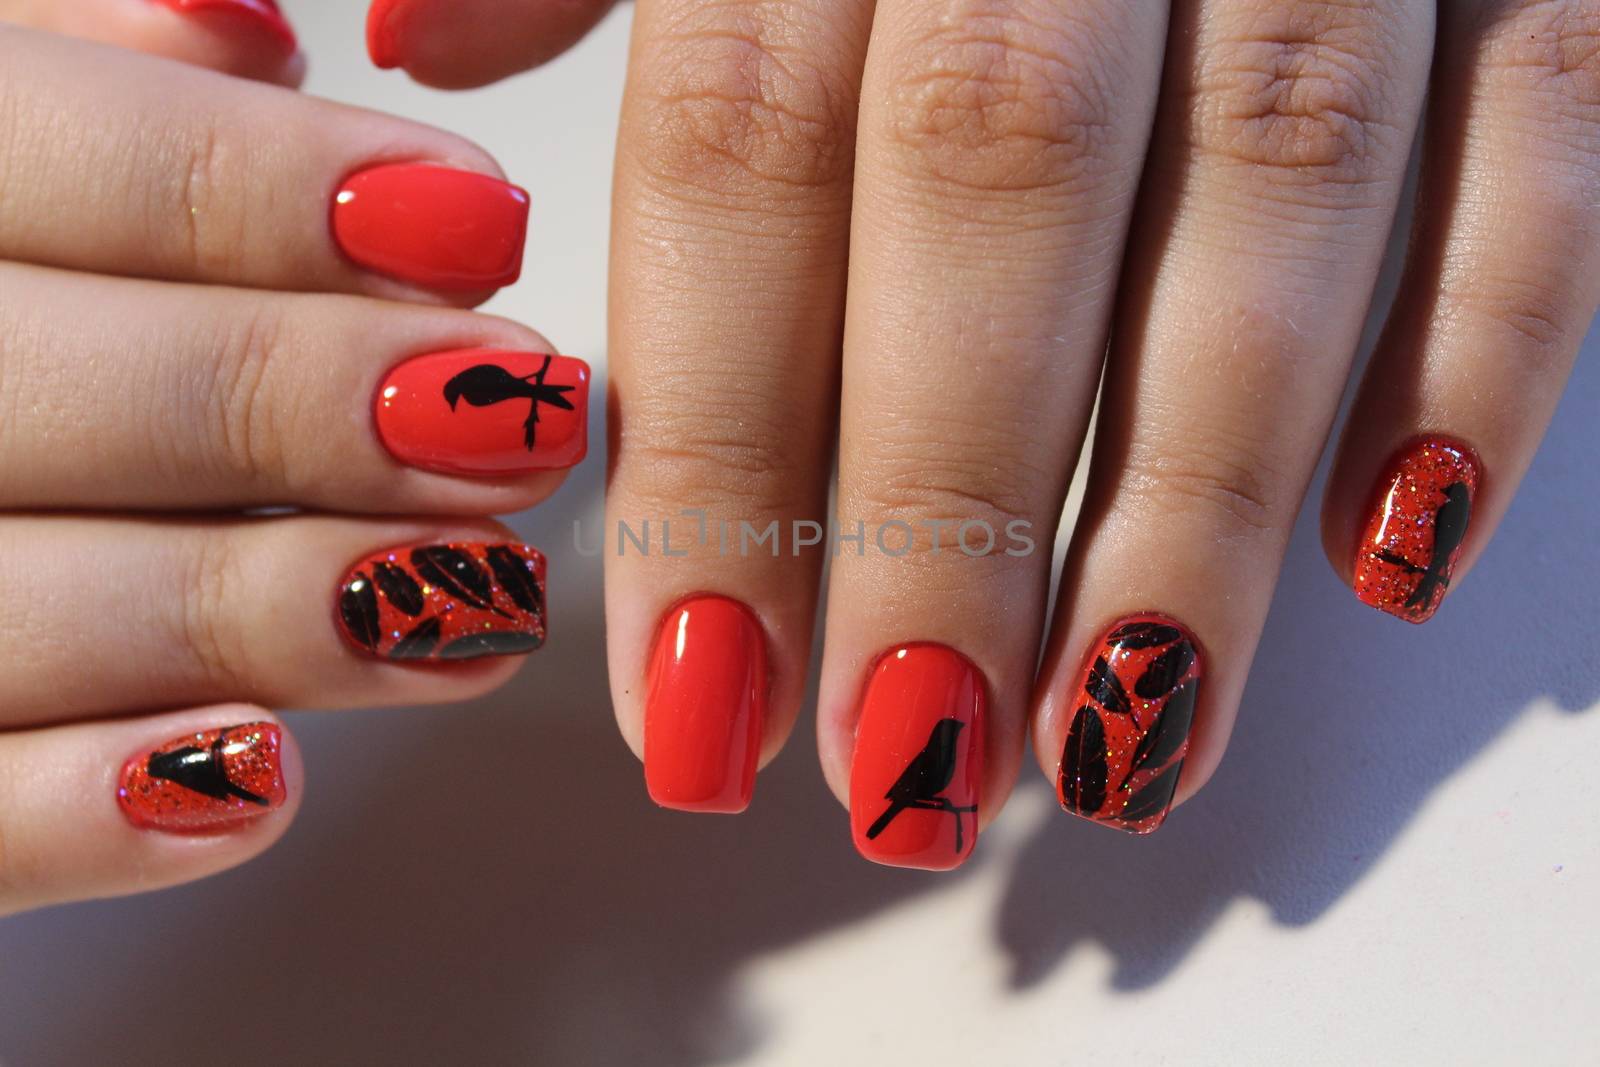 Manicure design red nails with pattern by SmirMaxStock